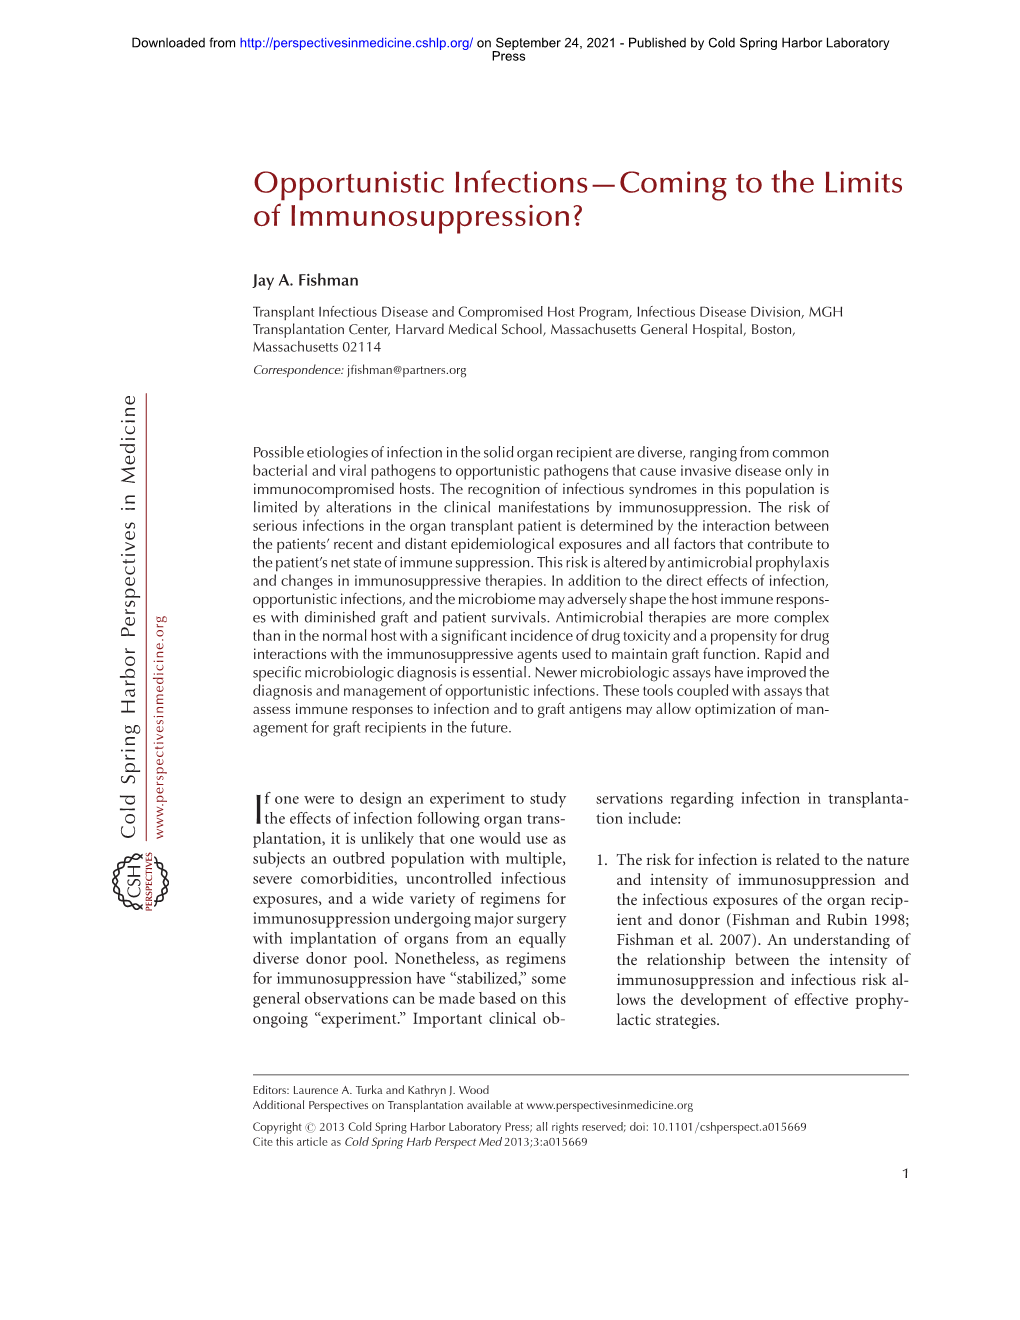 Opportunistic Infections—Coming to the Limits of Immunosuppression?